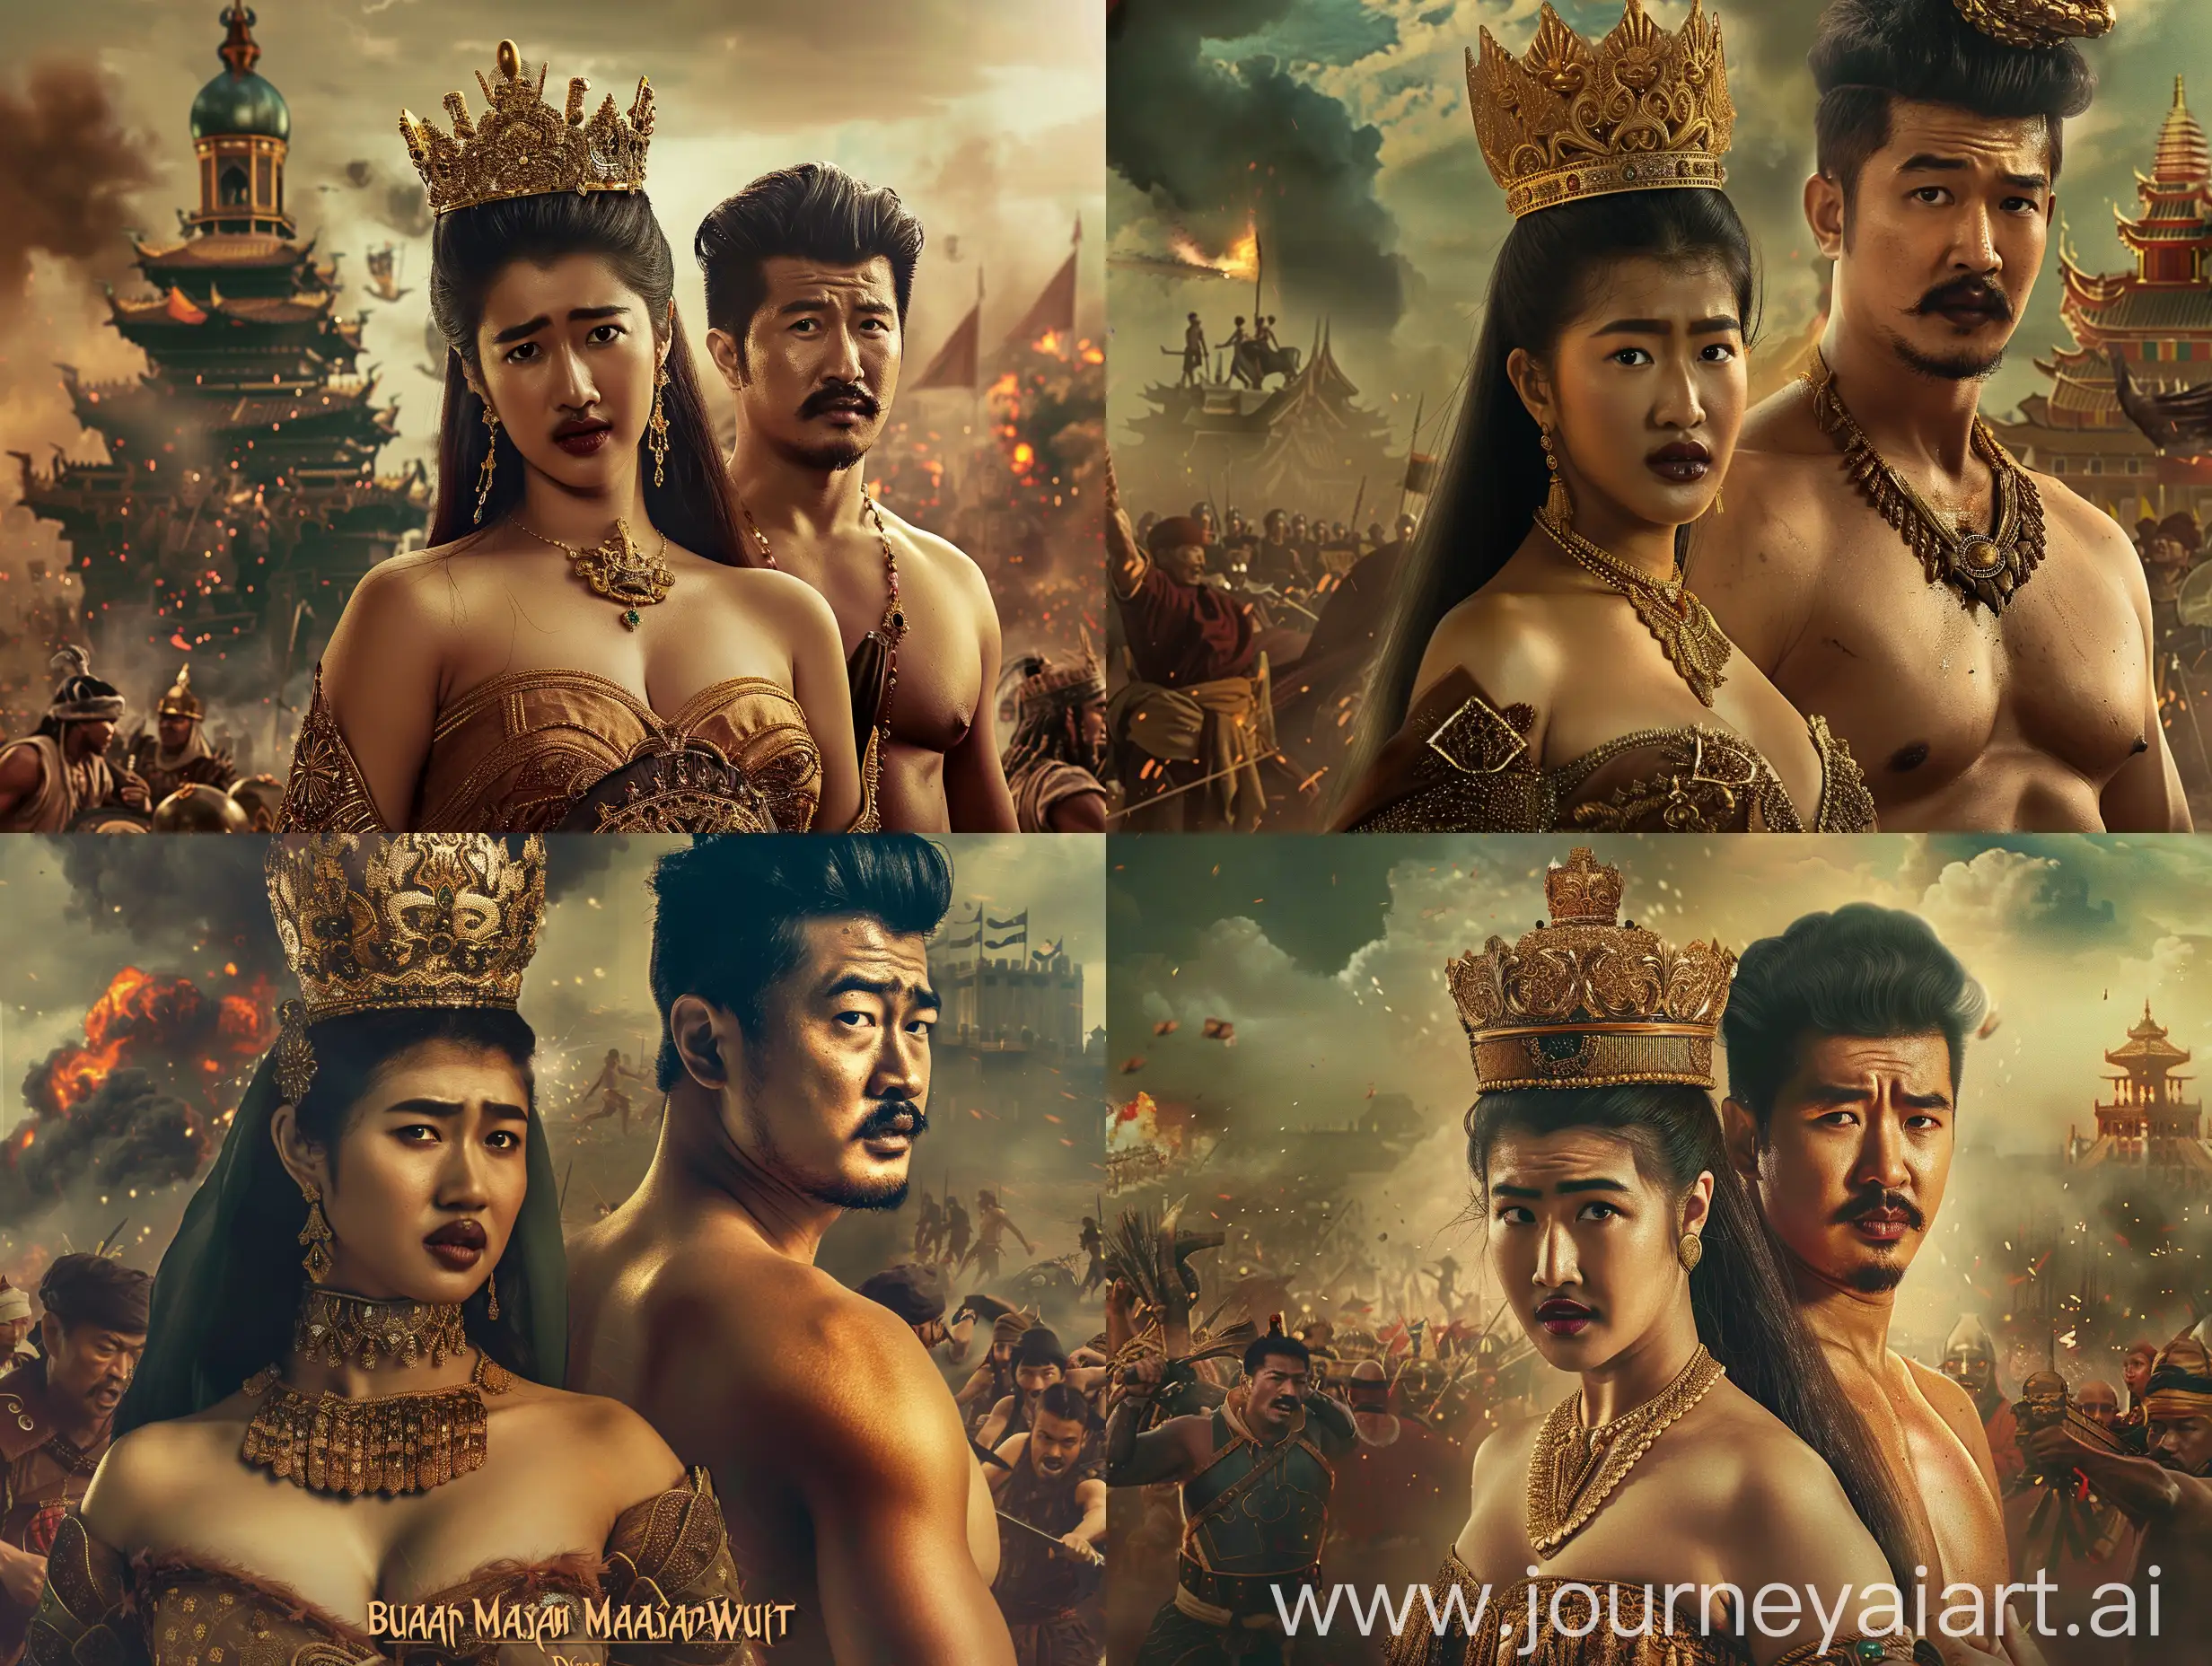 Create a dramatic movie poster, featuring Princess Dyah Pitaloka in the center, wearing a gold crown and traditional royal clothing.   Beside him, show King Hayam Wuruk in Majaphit royal clothing, without a shirt.   The background should depict the chaotic battlefield of Bubat Square with clashing fighters.   Use rich, warm colors like maroon, gold, and emerald green.   Use soft, dramatic lighting to highlight central figures.